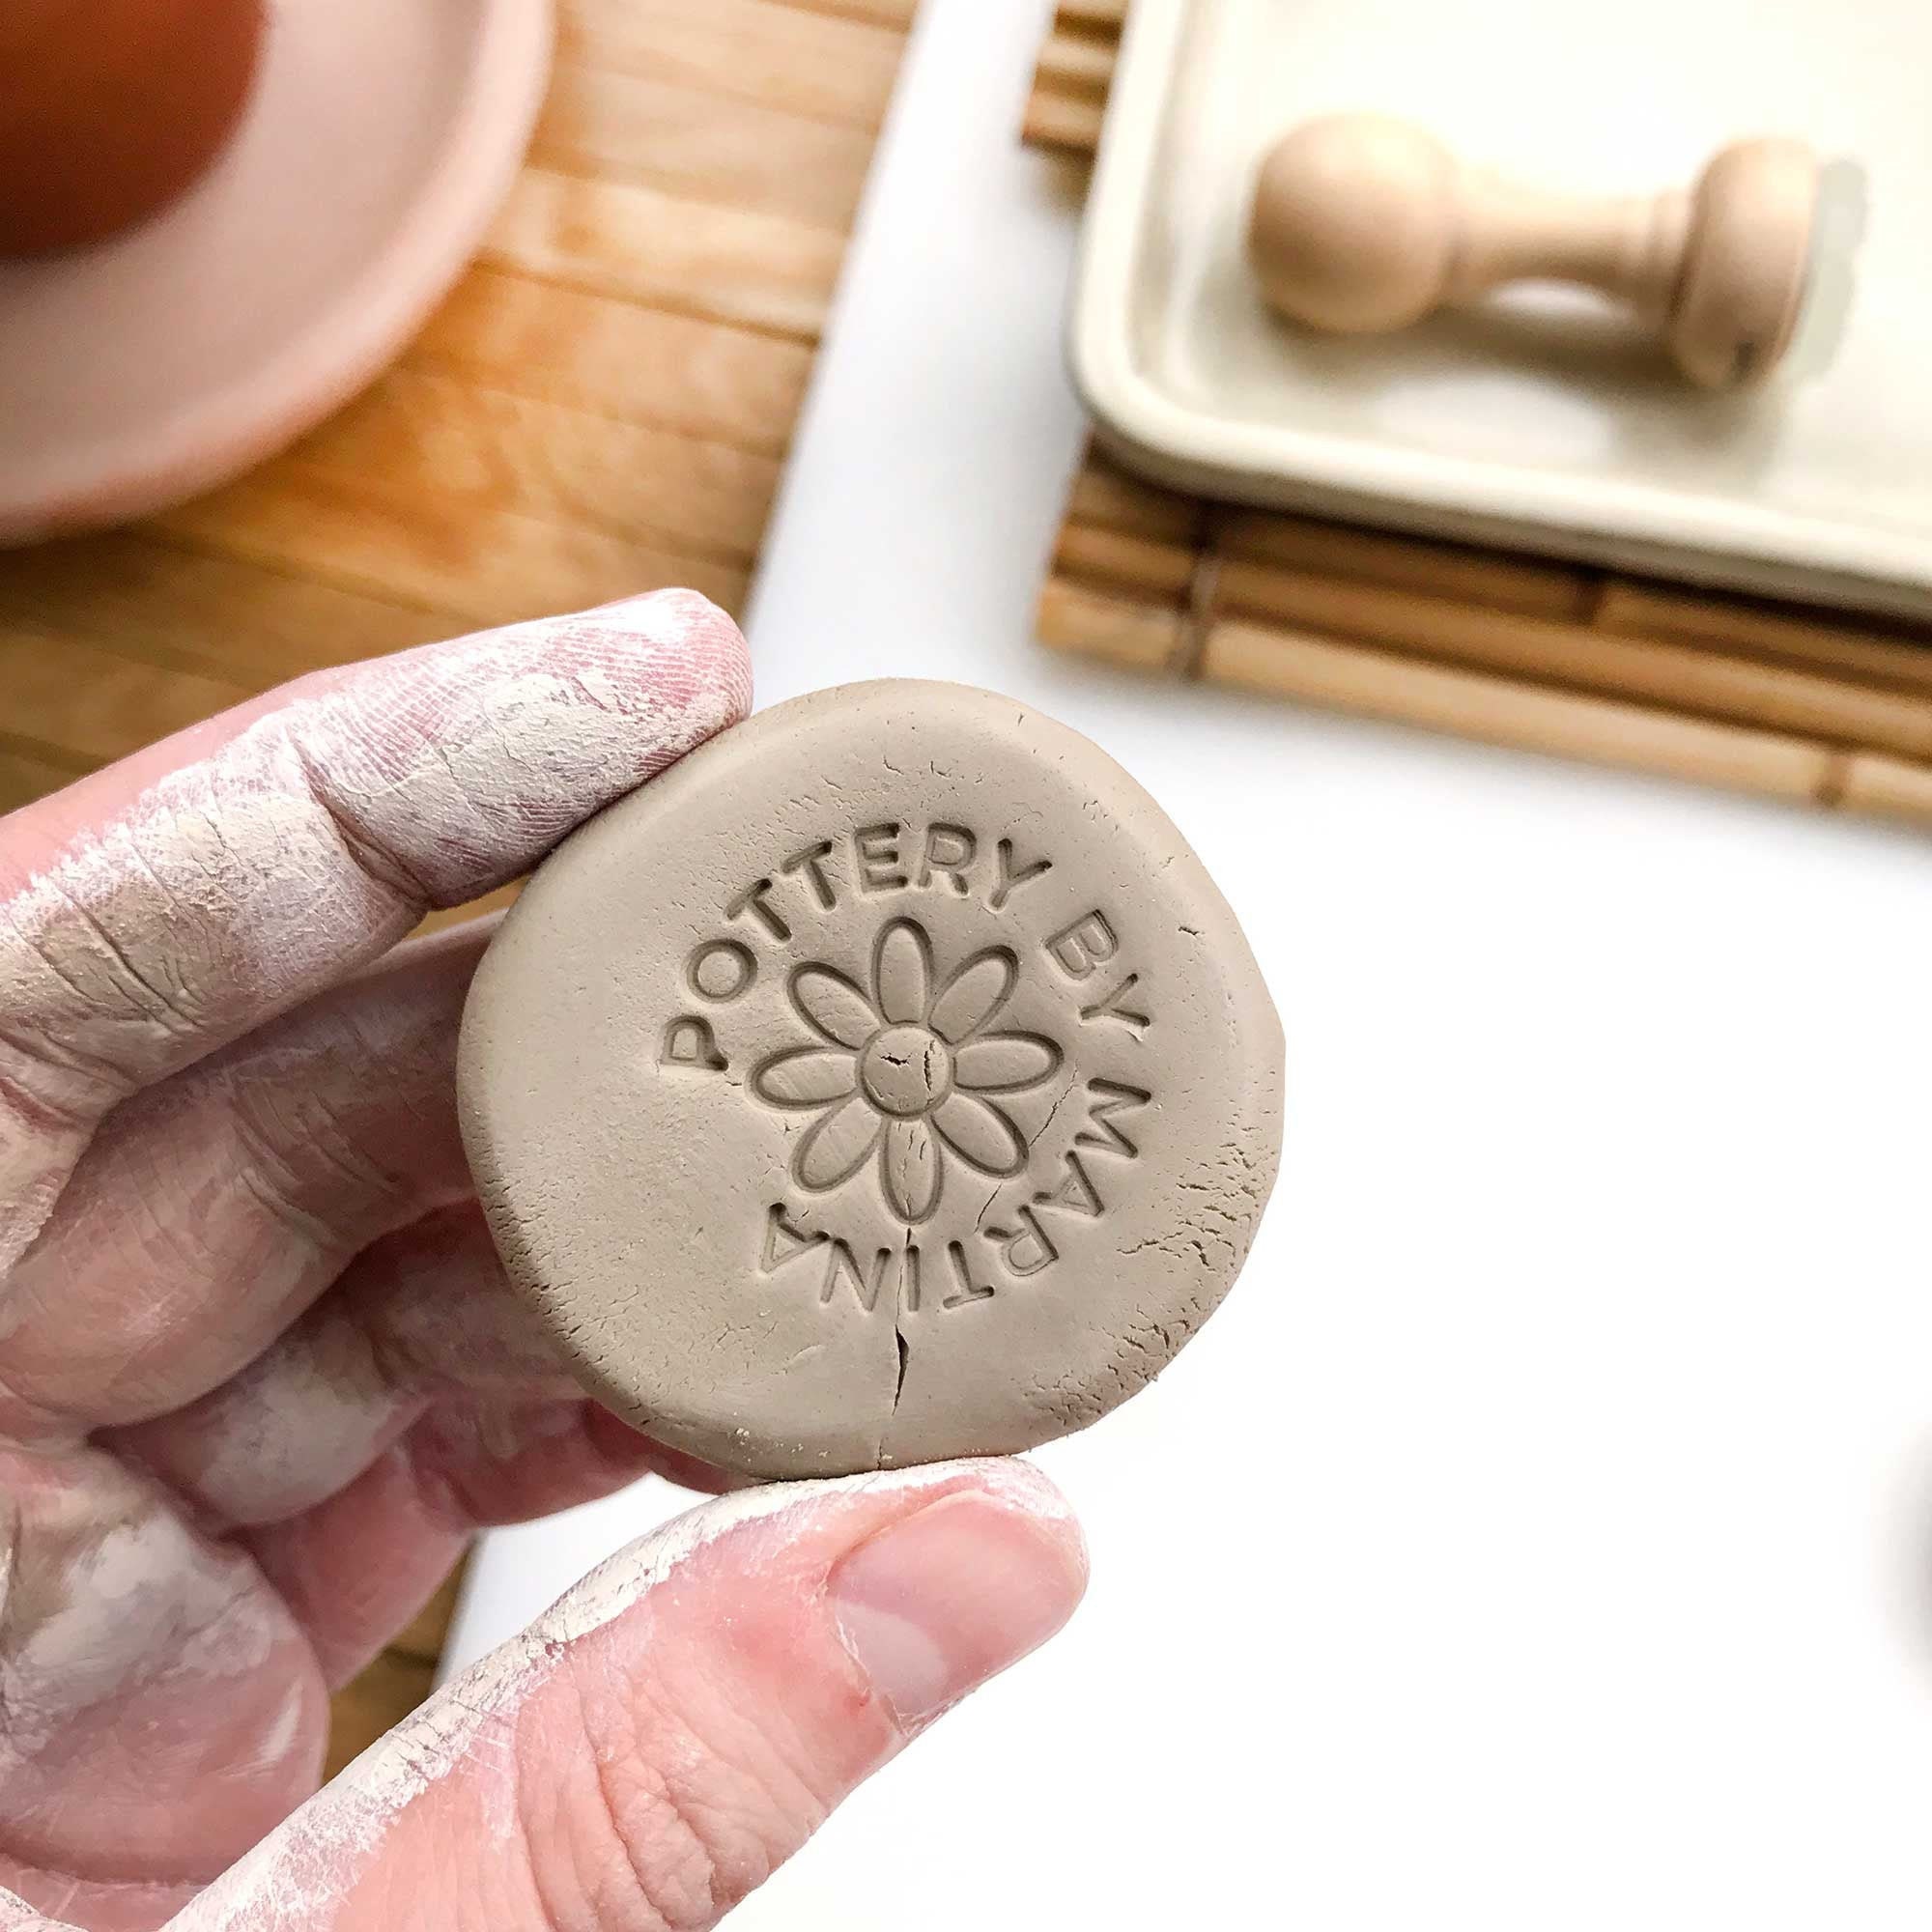 Custom Clay Stamp With Name and Heart Drawing, Stamp for Fresh